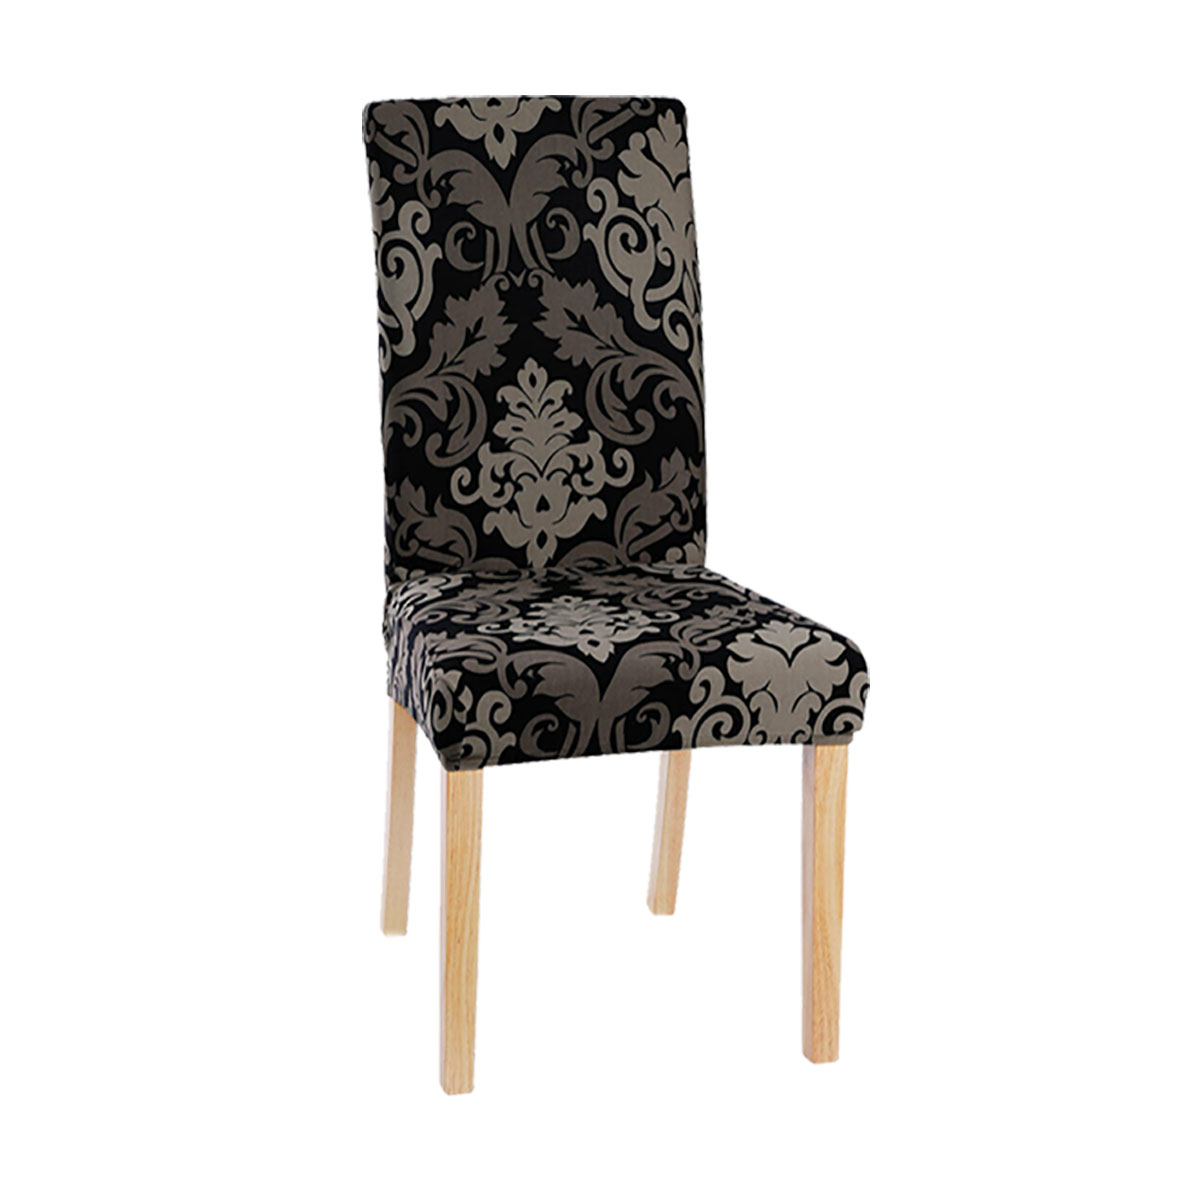 Velvet Dining Chair Seat Covers Spandex Slip Banquet Home Protective